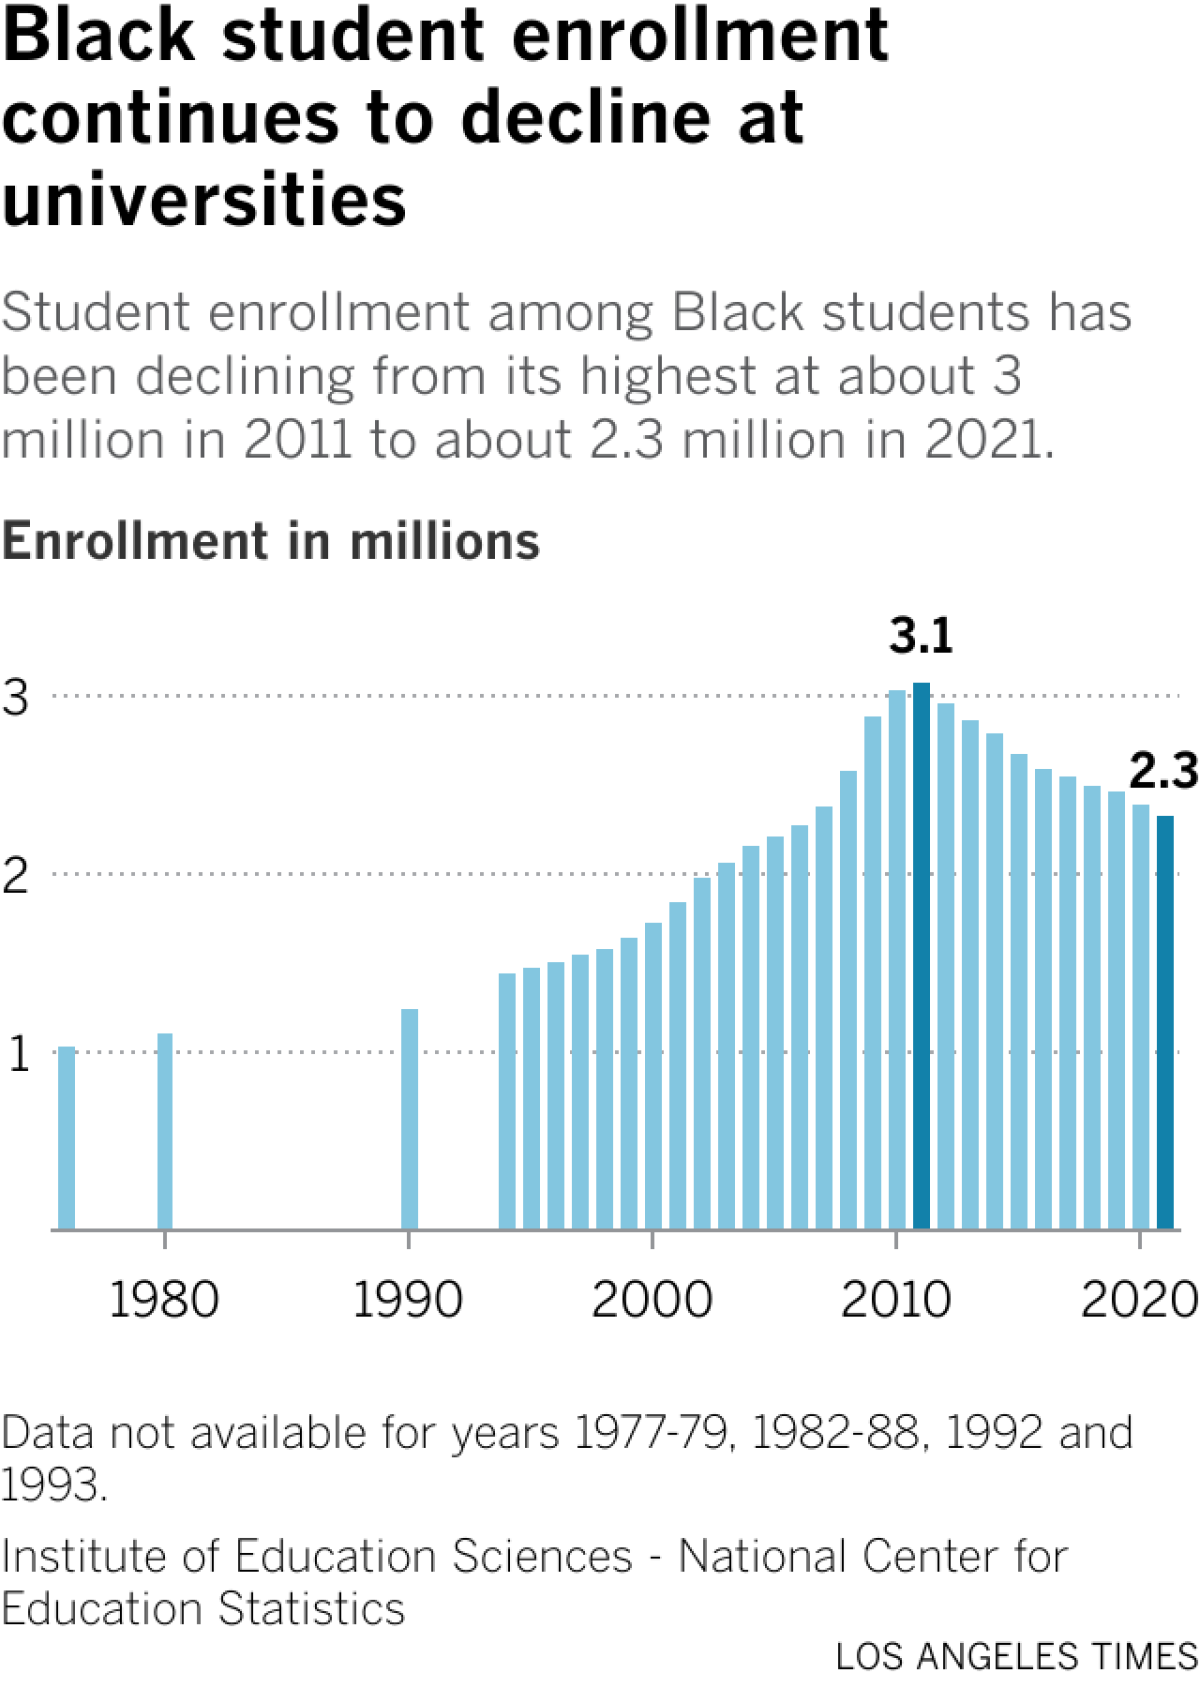 Student enrollment among Black students has been declining from its highest at about 3 million in 2011 to about 2.3 million in 2021.
